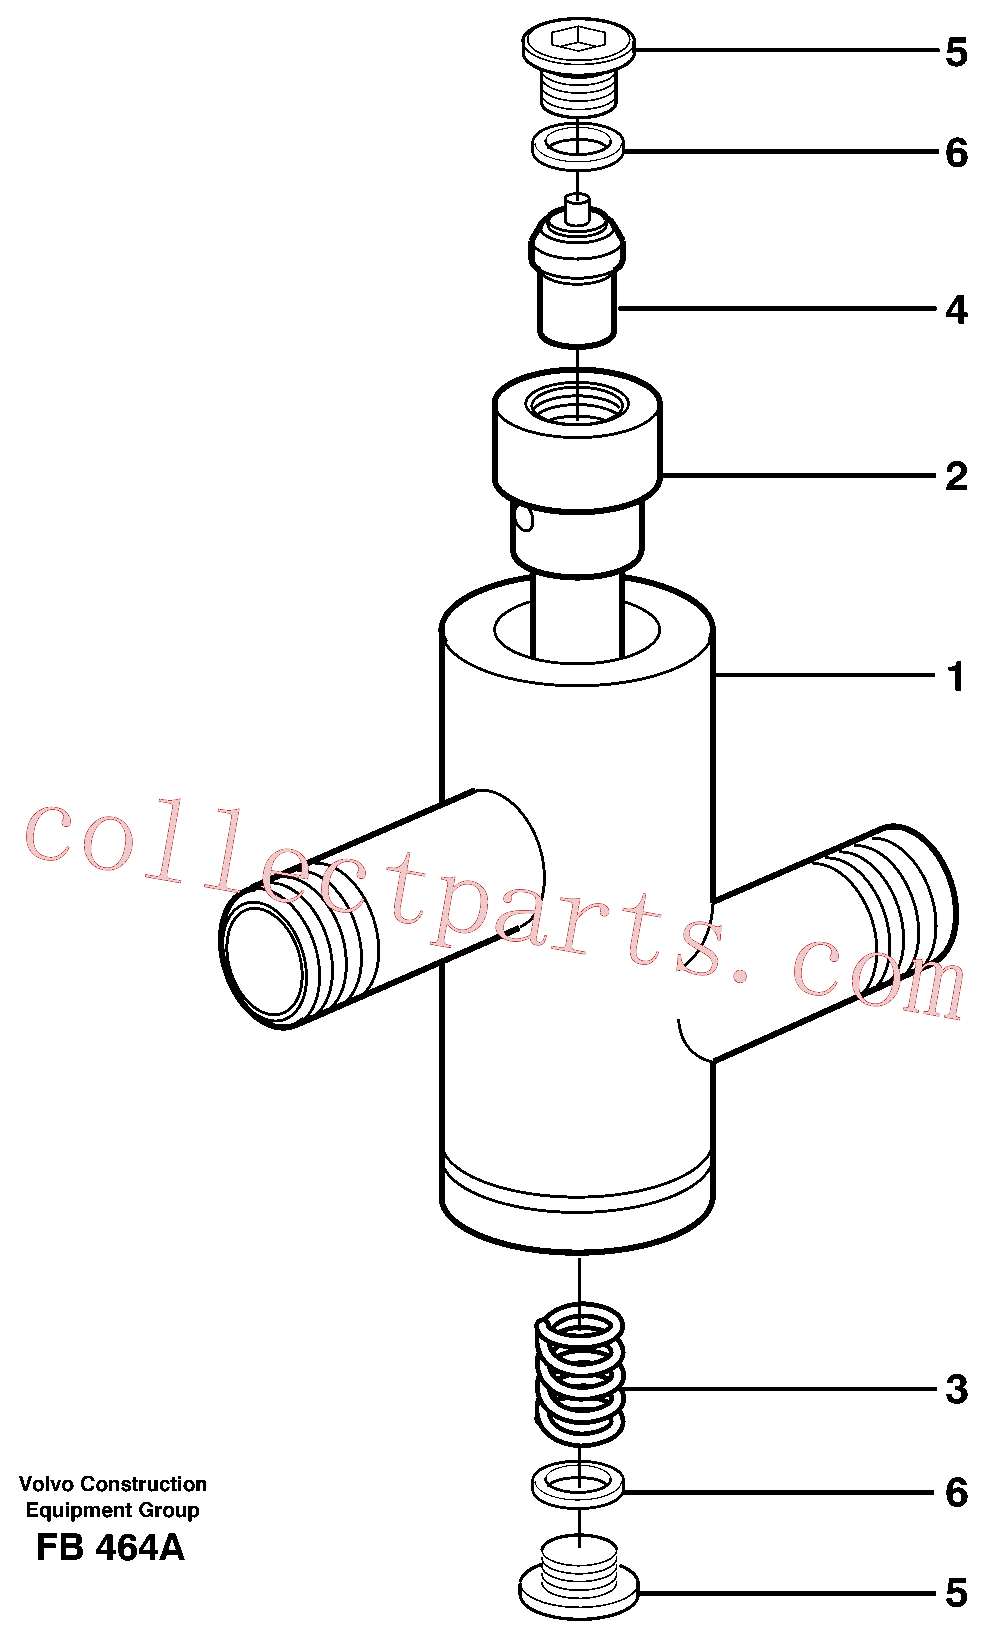 VOE14344085 for Volvo Thermostatic valve(FB464A assembly)